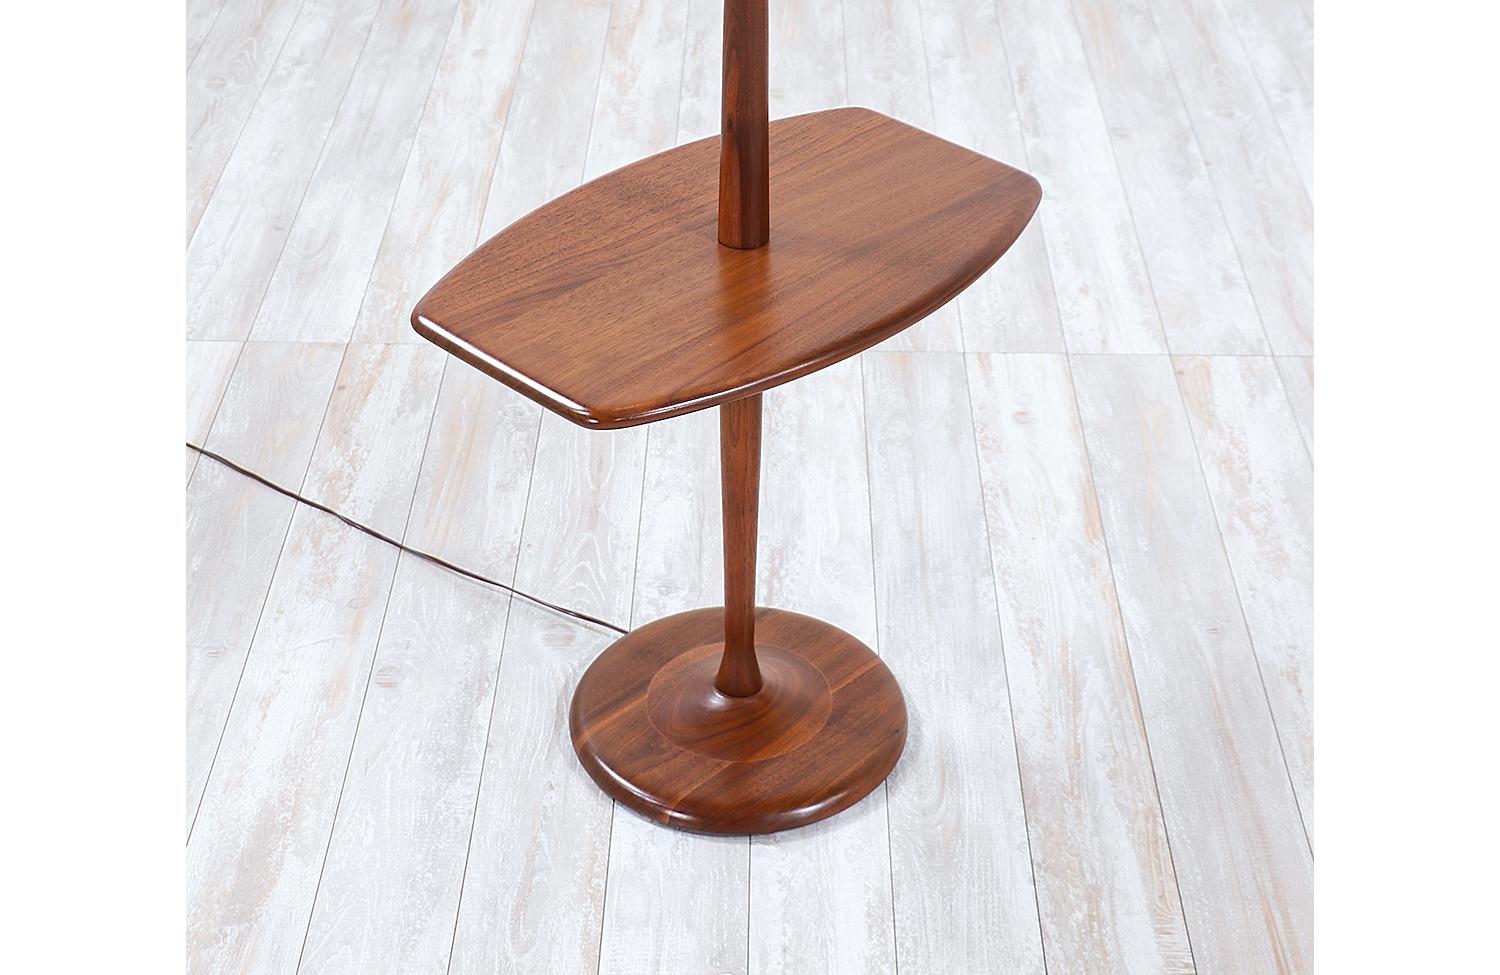 Mid-20th Century Mid-Century Modern Sculpted Walnut Floor Lamp with Side Table by Laurel